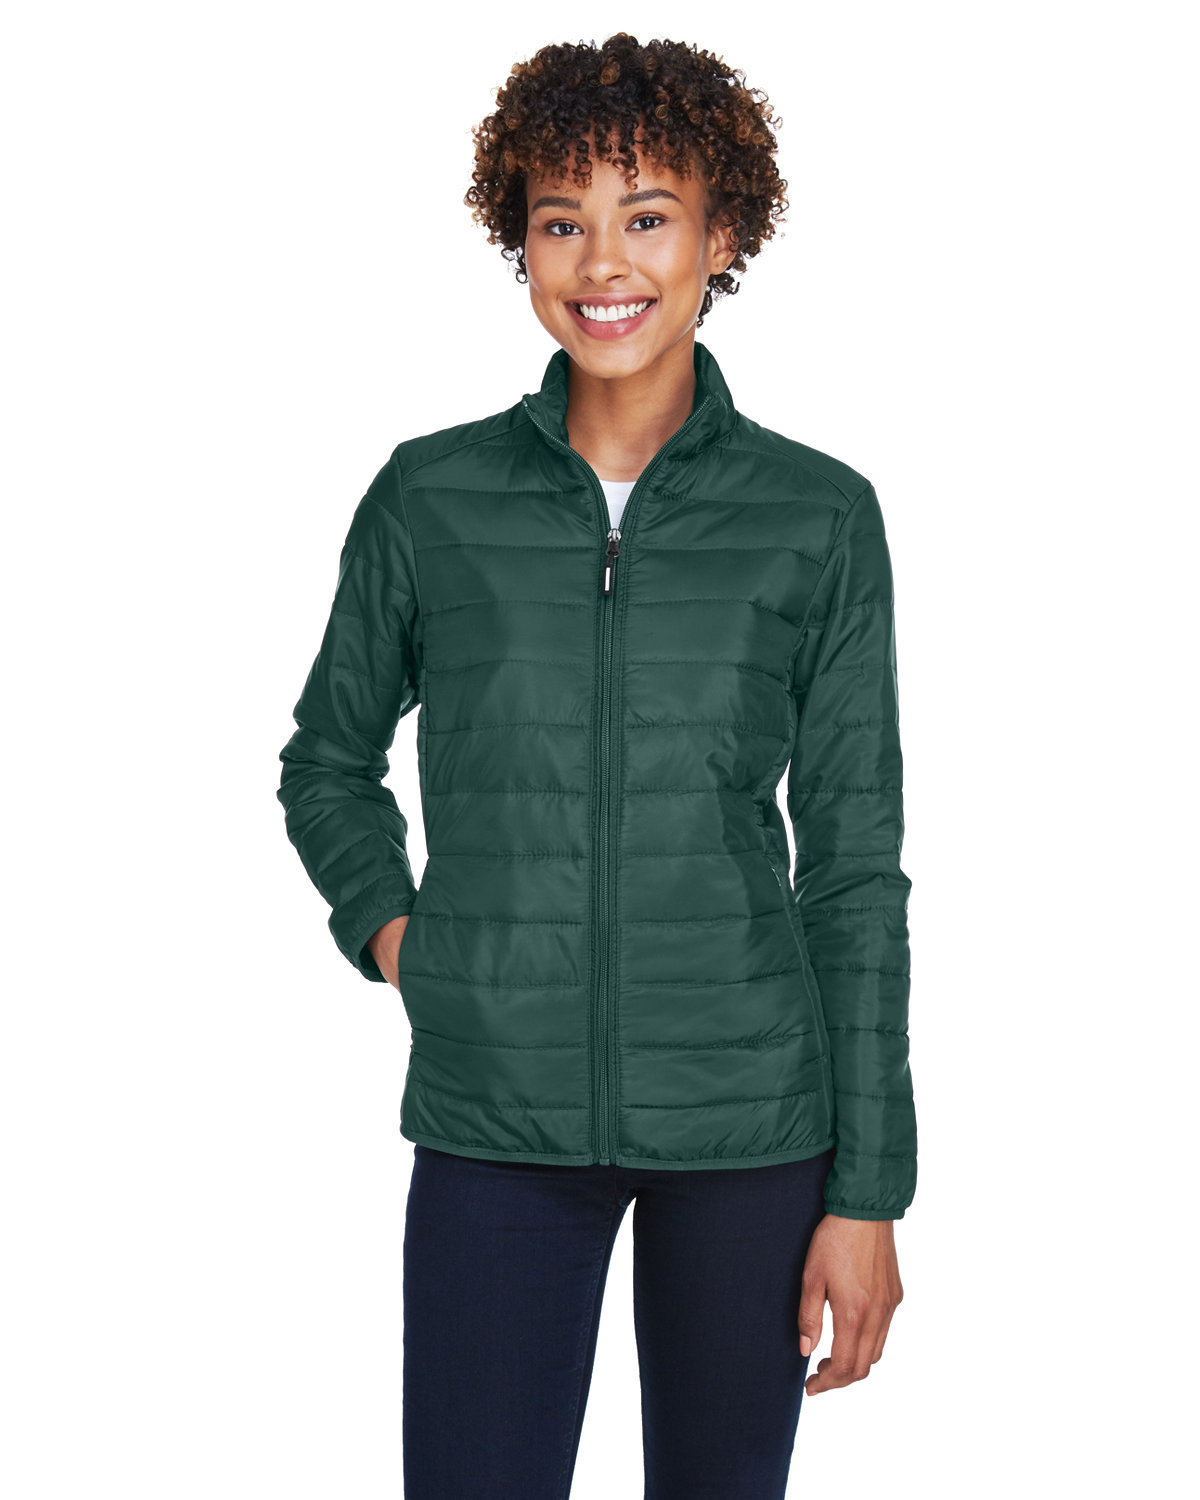 Core 365 Ladies' Prevail Packable Puffer Jacket FOREST 